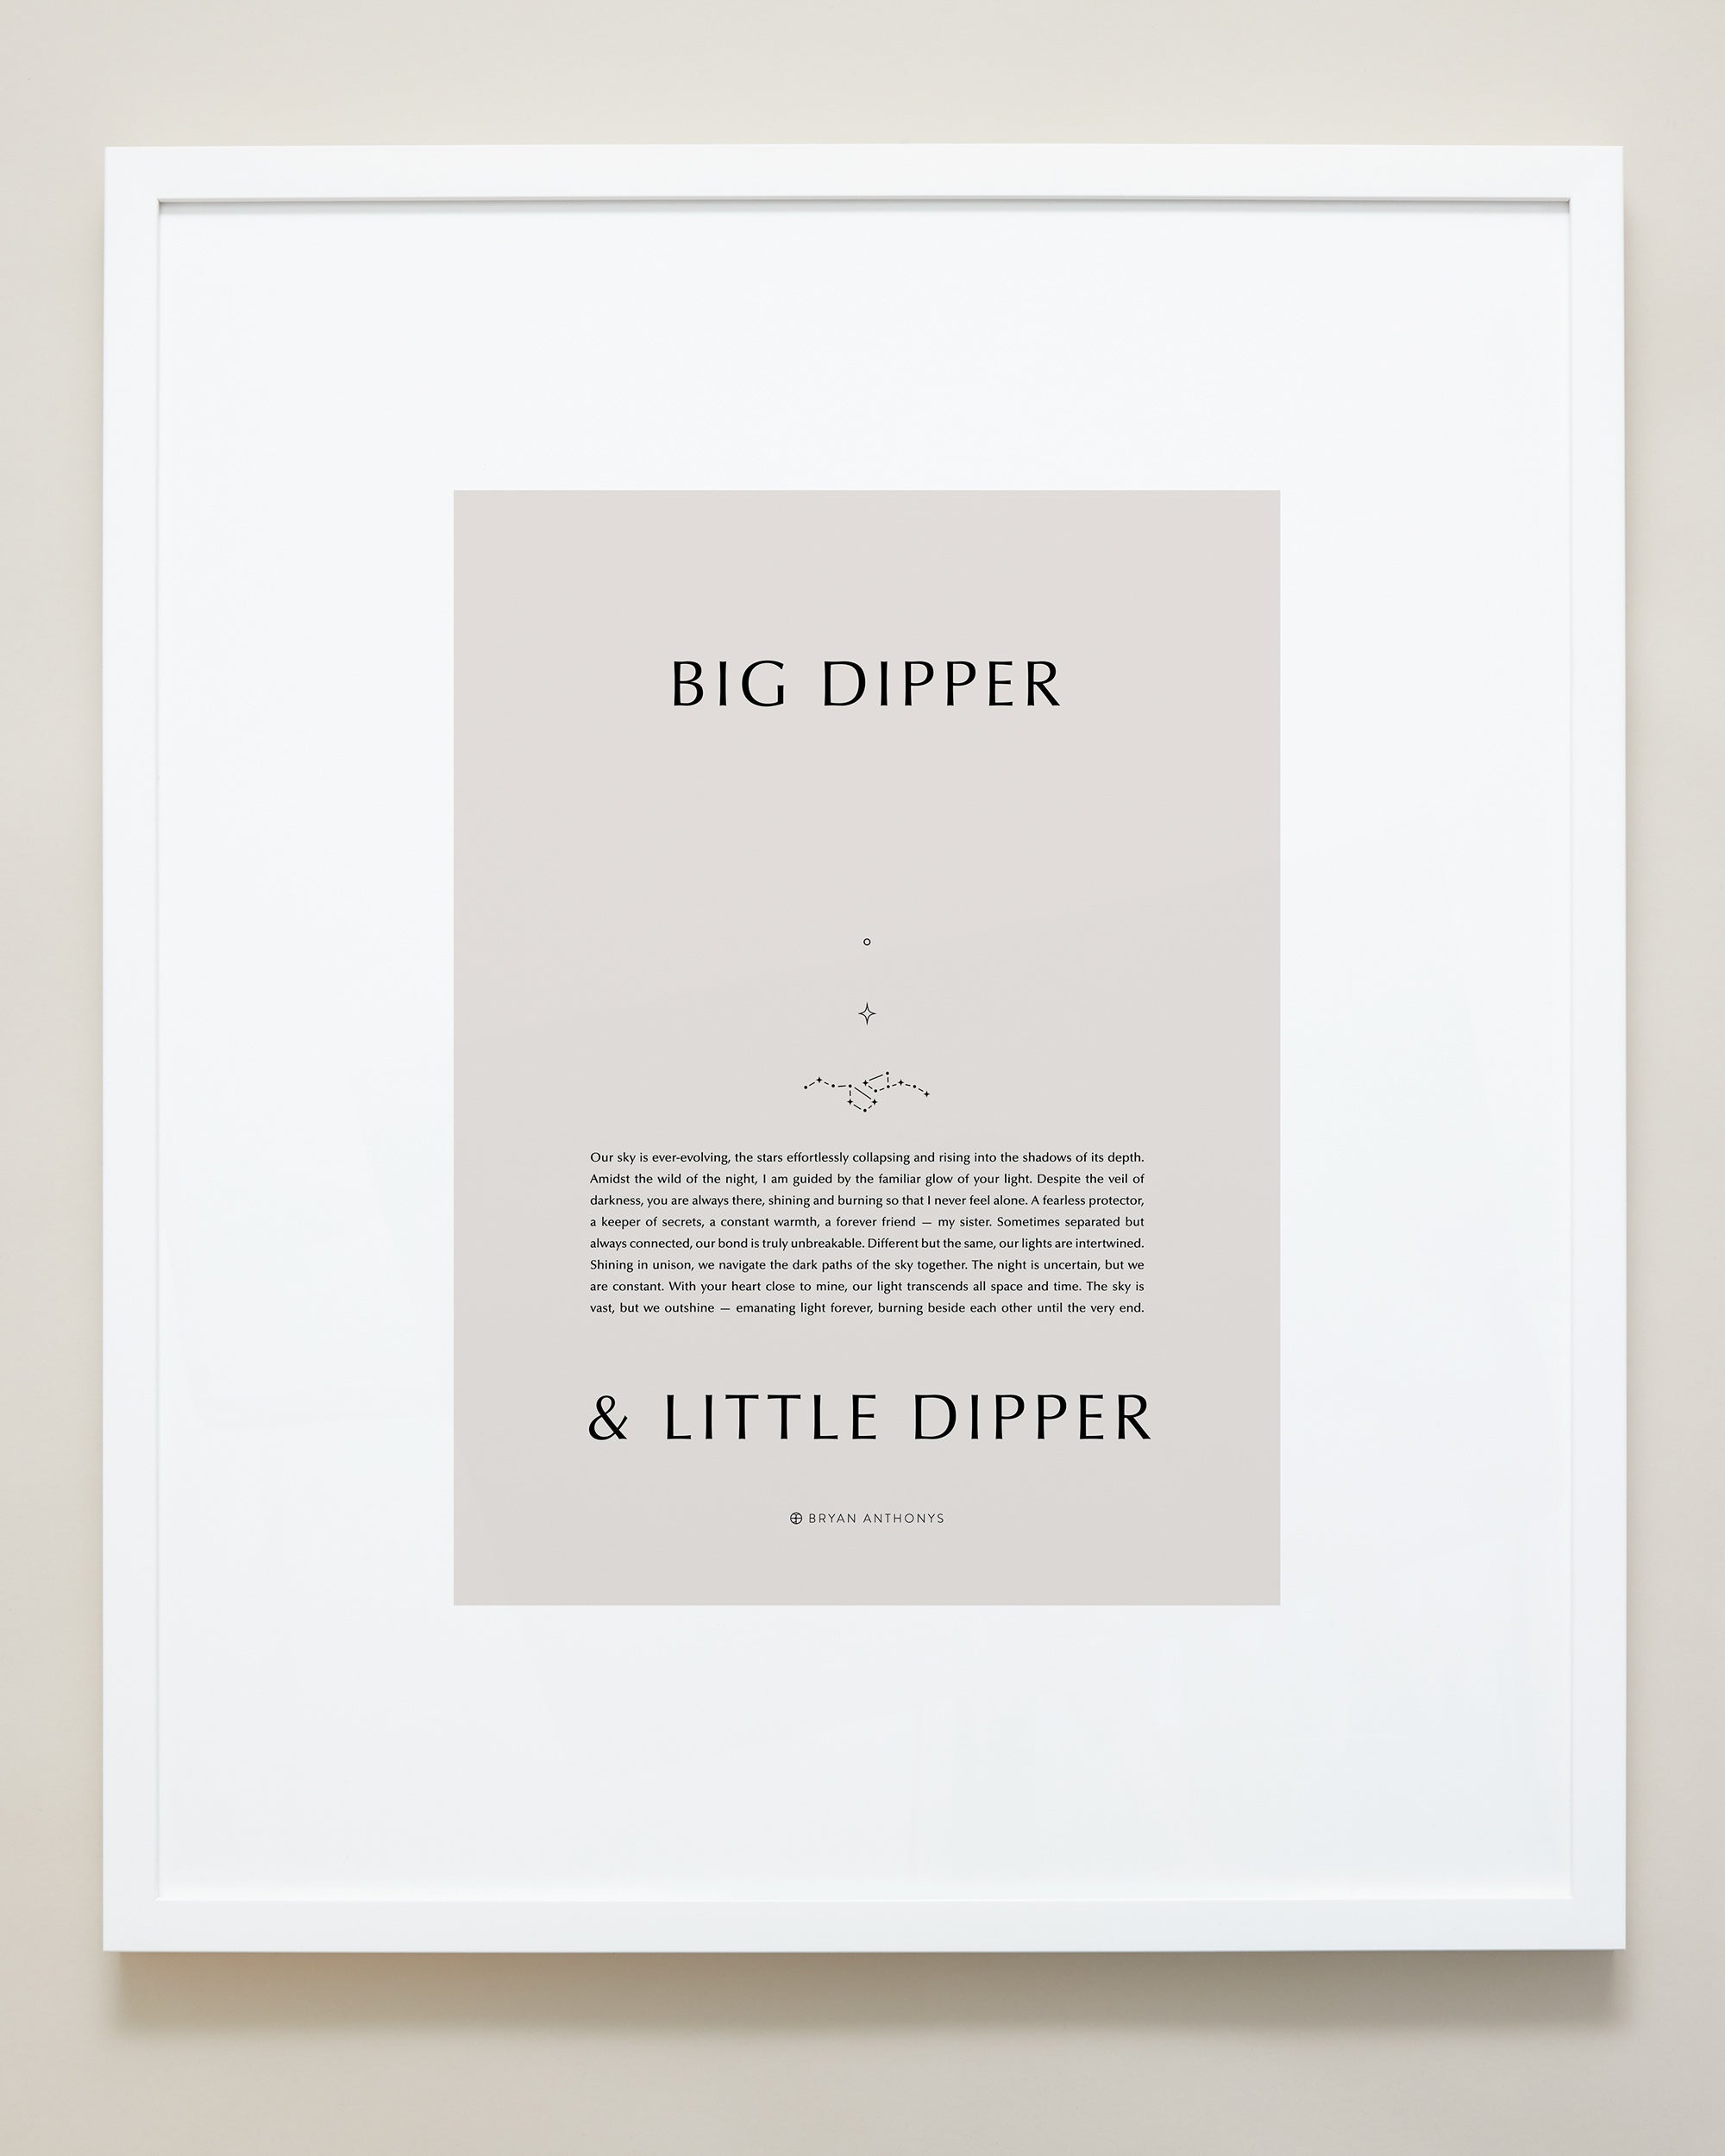 Bryan Anthonys Home Decor Purposeful Prints Big Dipper & Little Dipper Iconic Framed Print Tan Art With White Frame 20x24